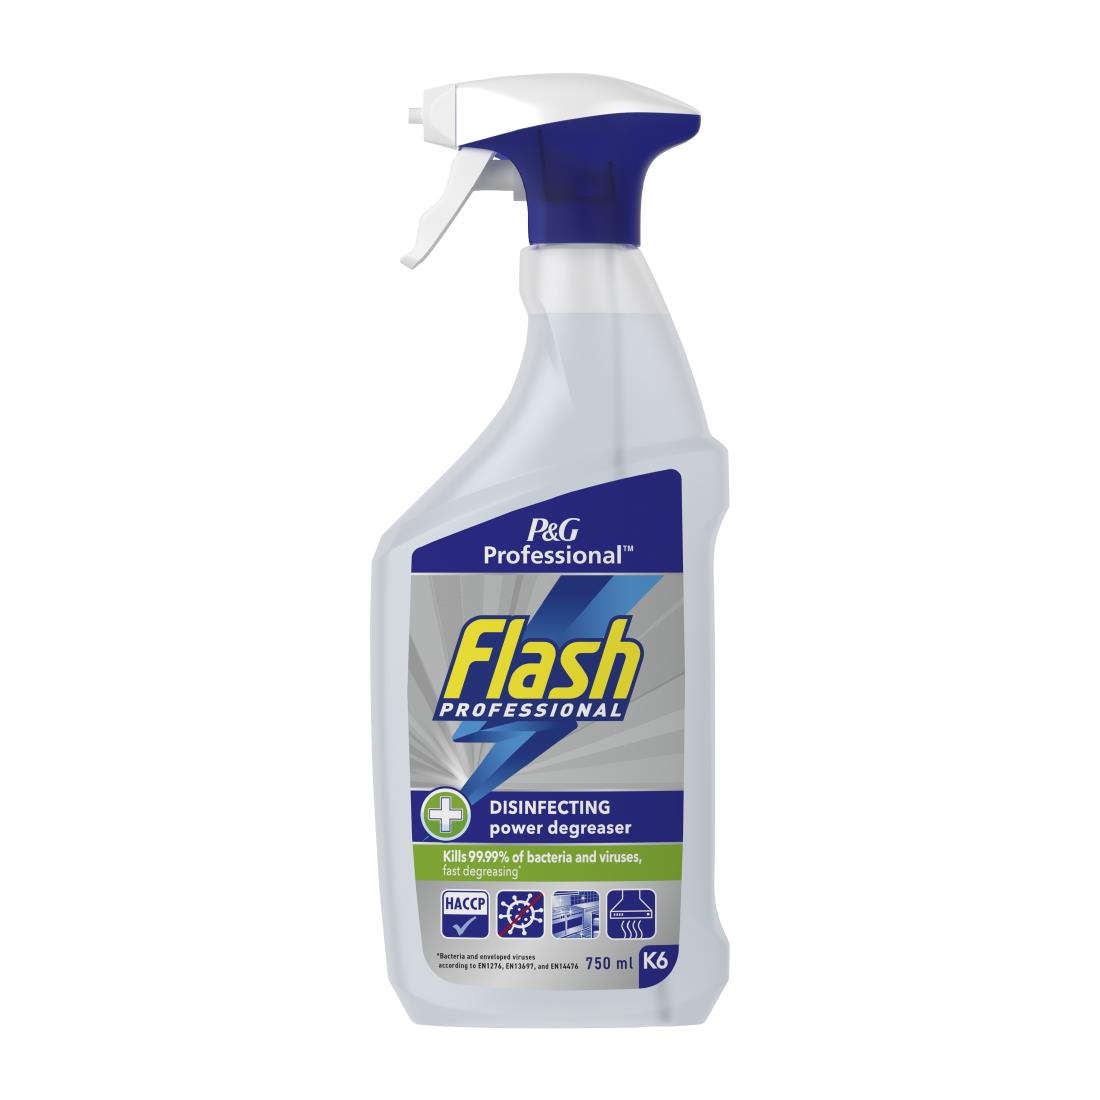 Flash Professional Disinfecting Power Degreaser Cleaning Spray 750ml Pack of 6 (DX565)